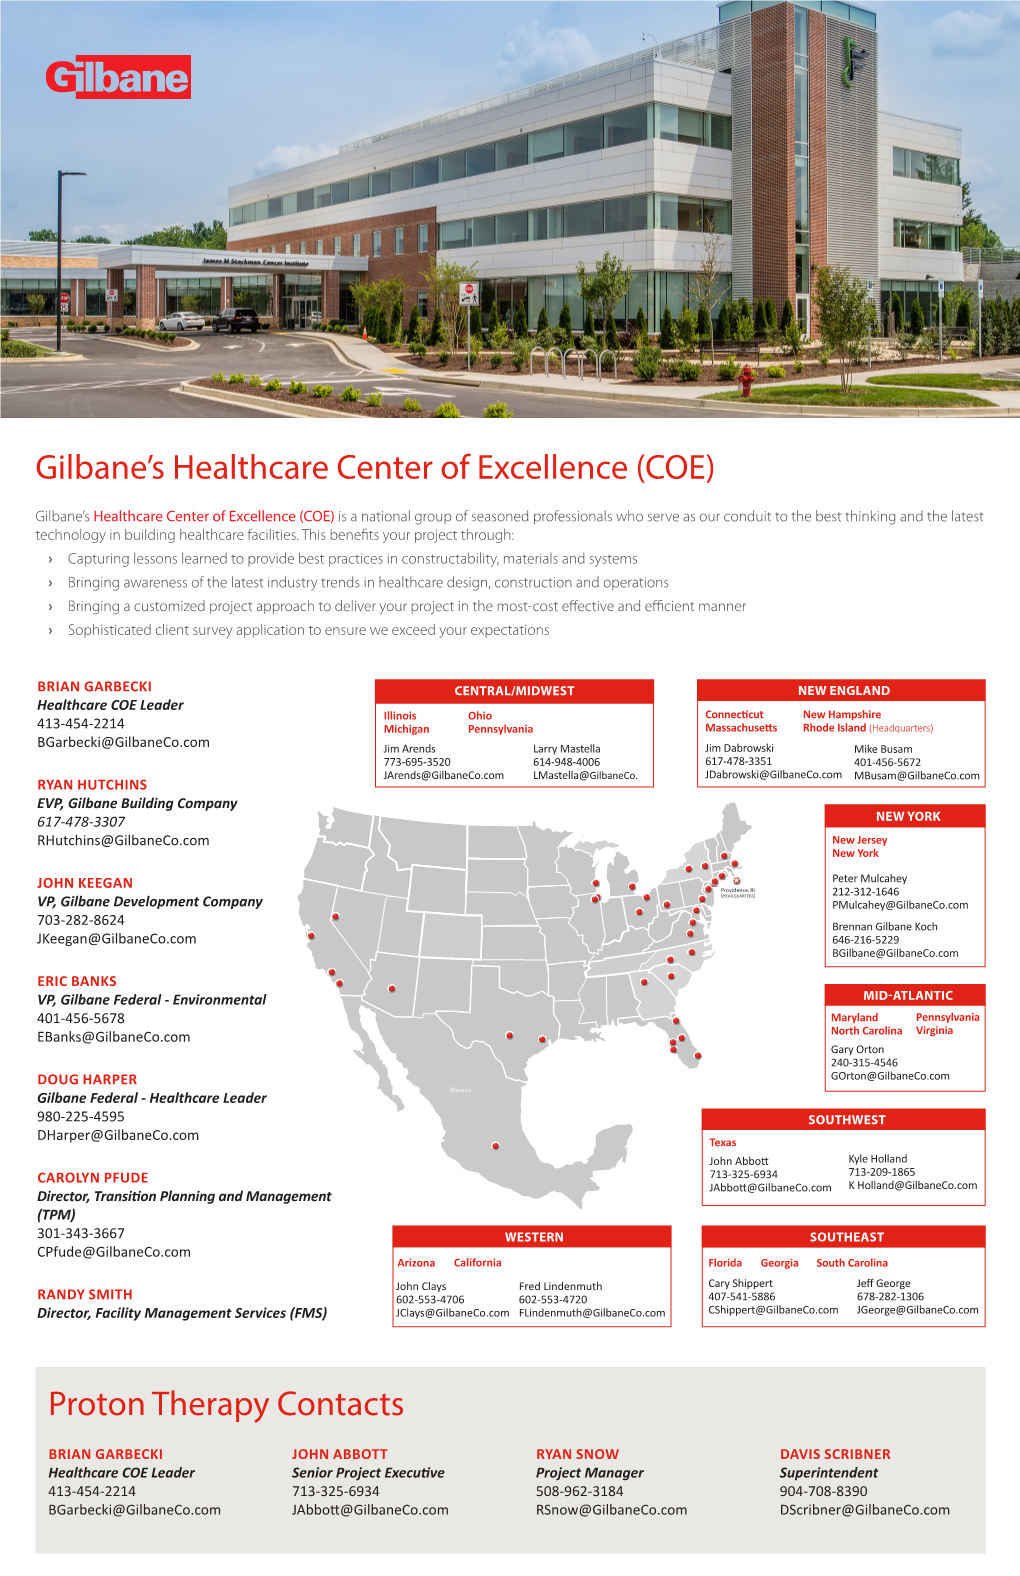 Gilbane's Healthcare Center of Excellence (COE) Proton Therapy Contacts